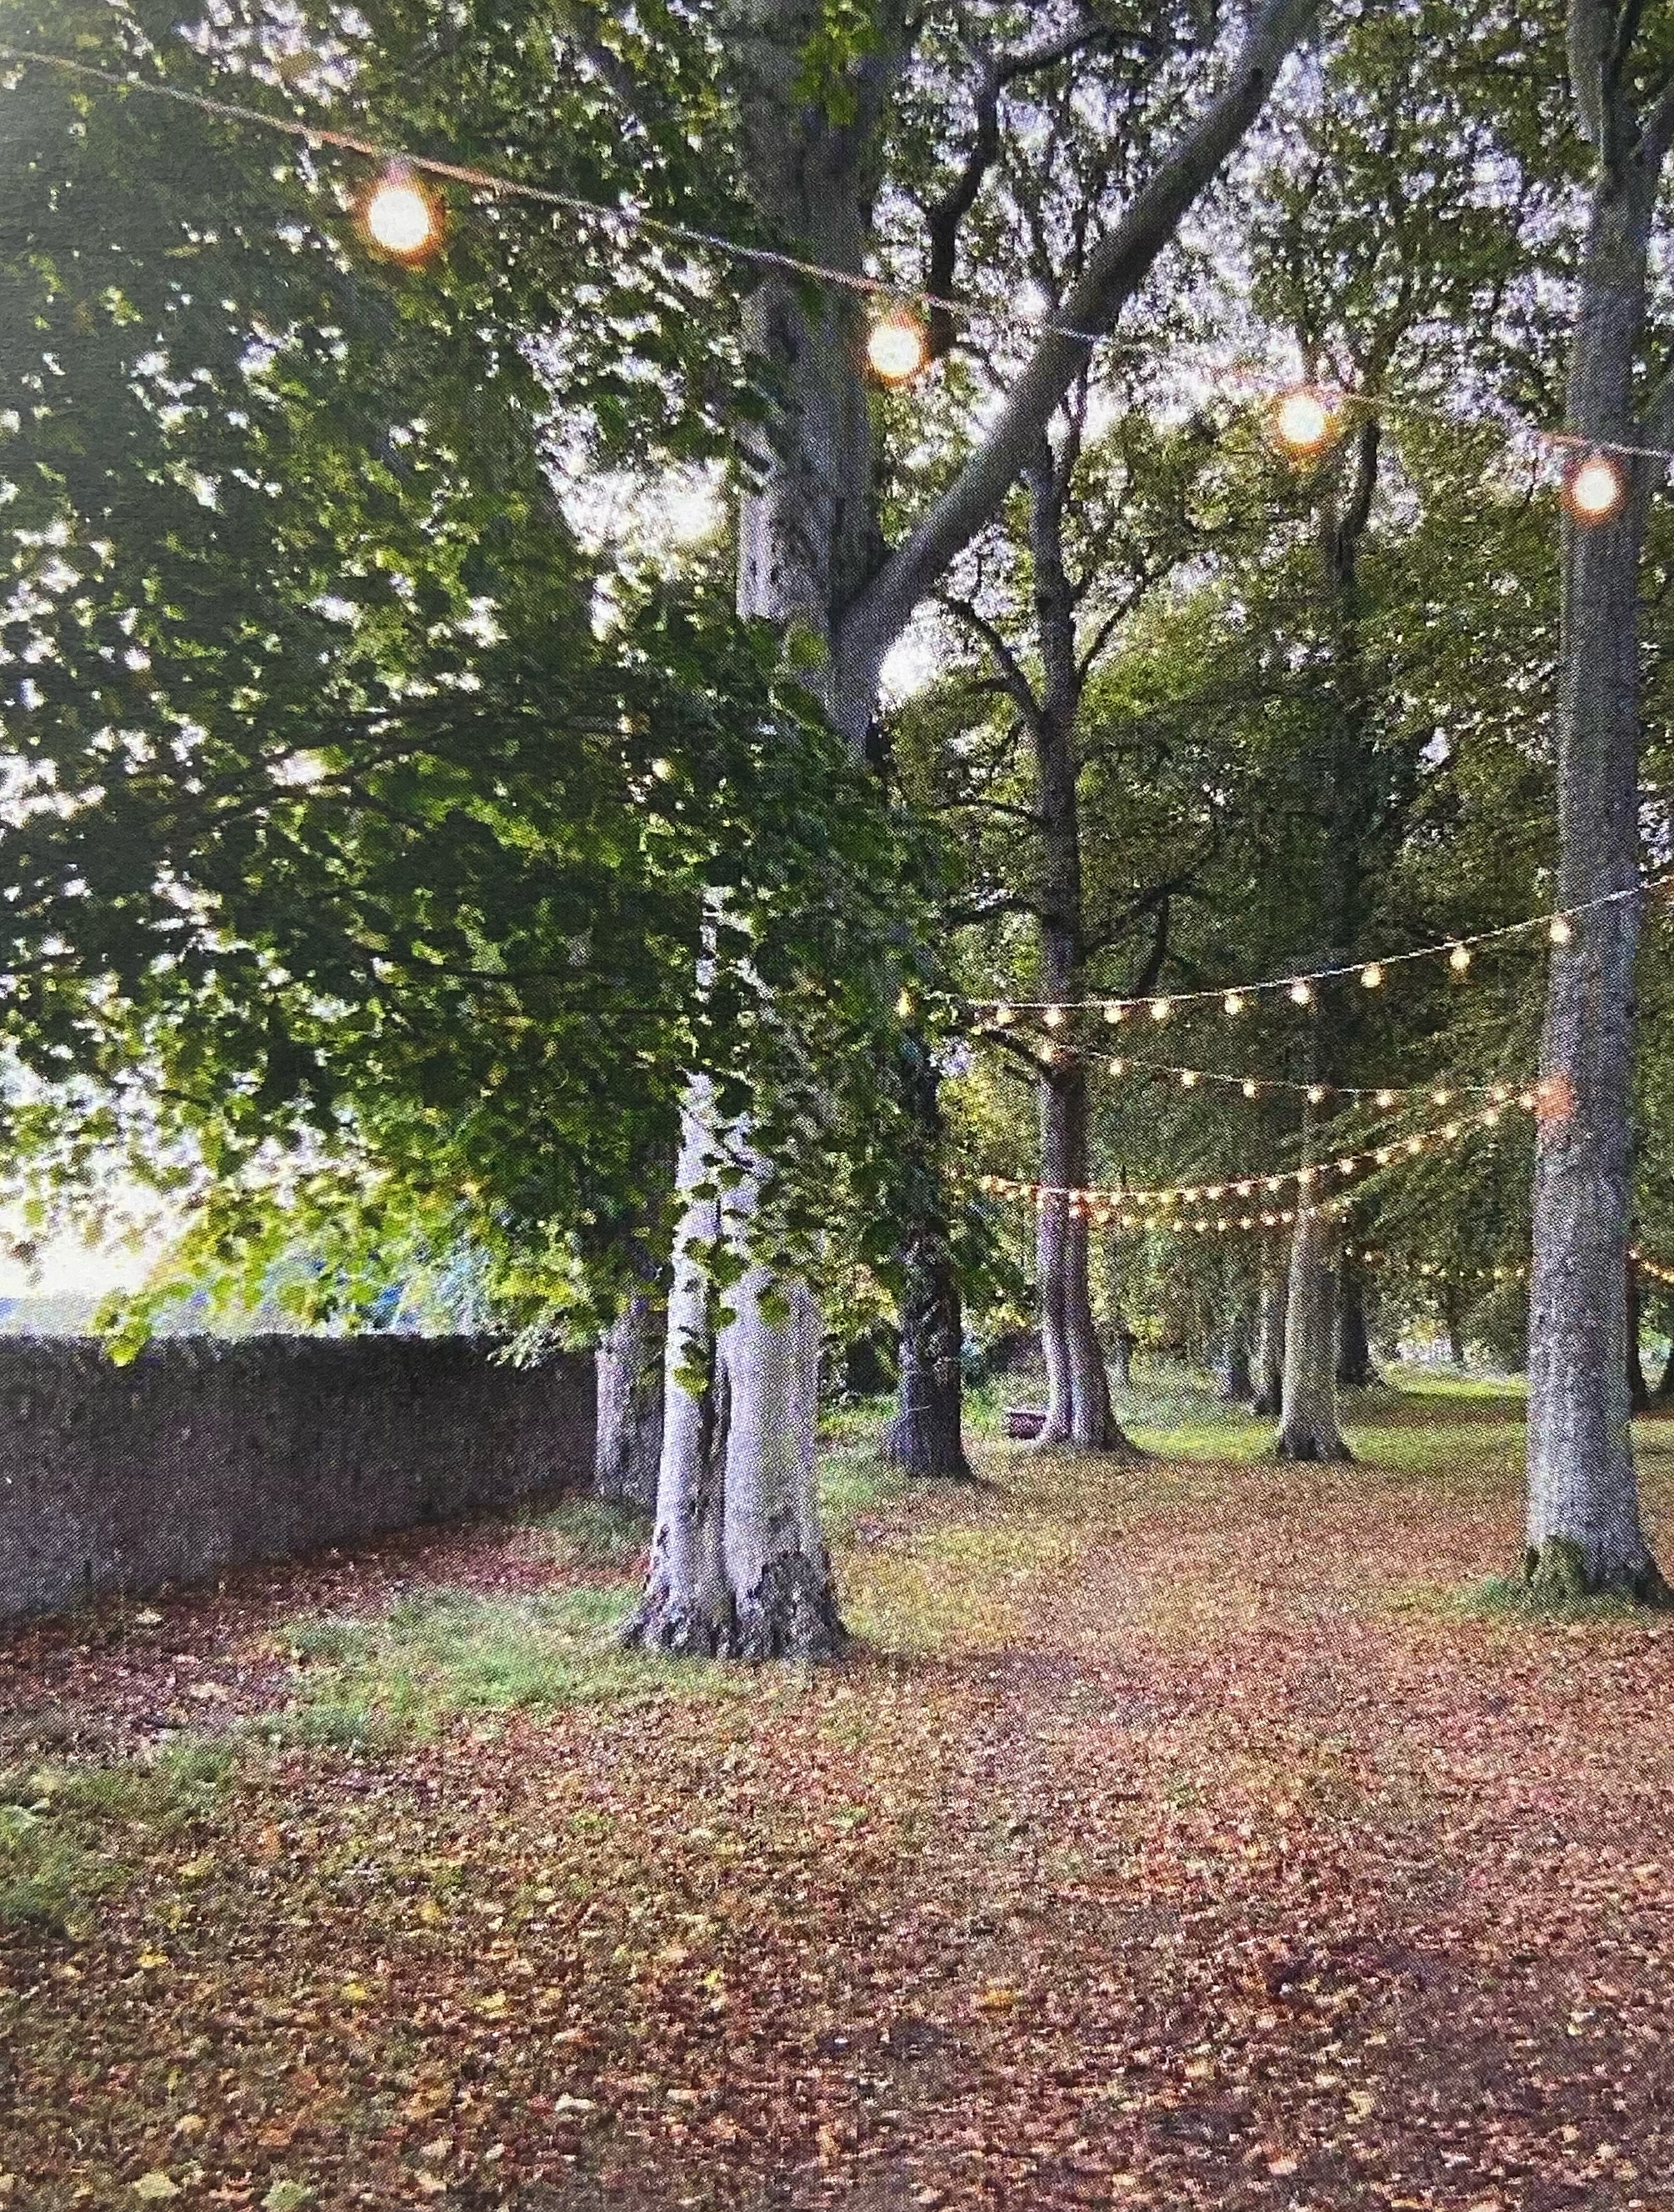 Fairy lights in the trees